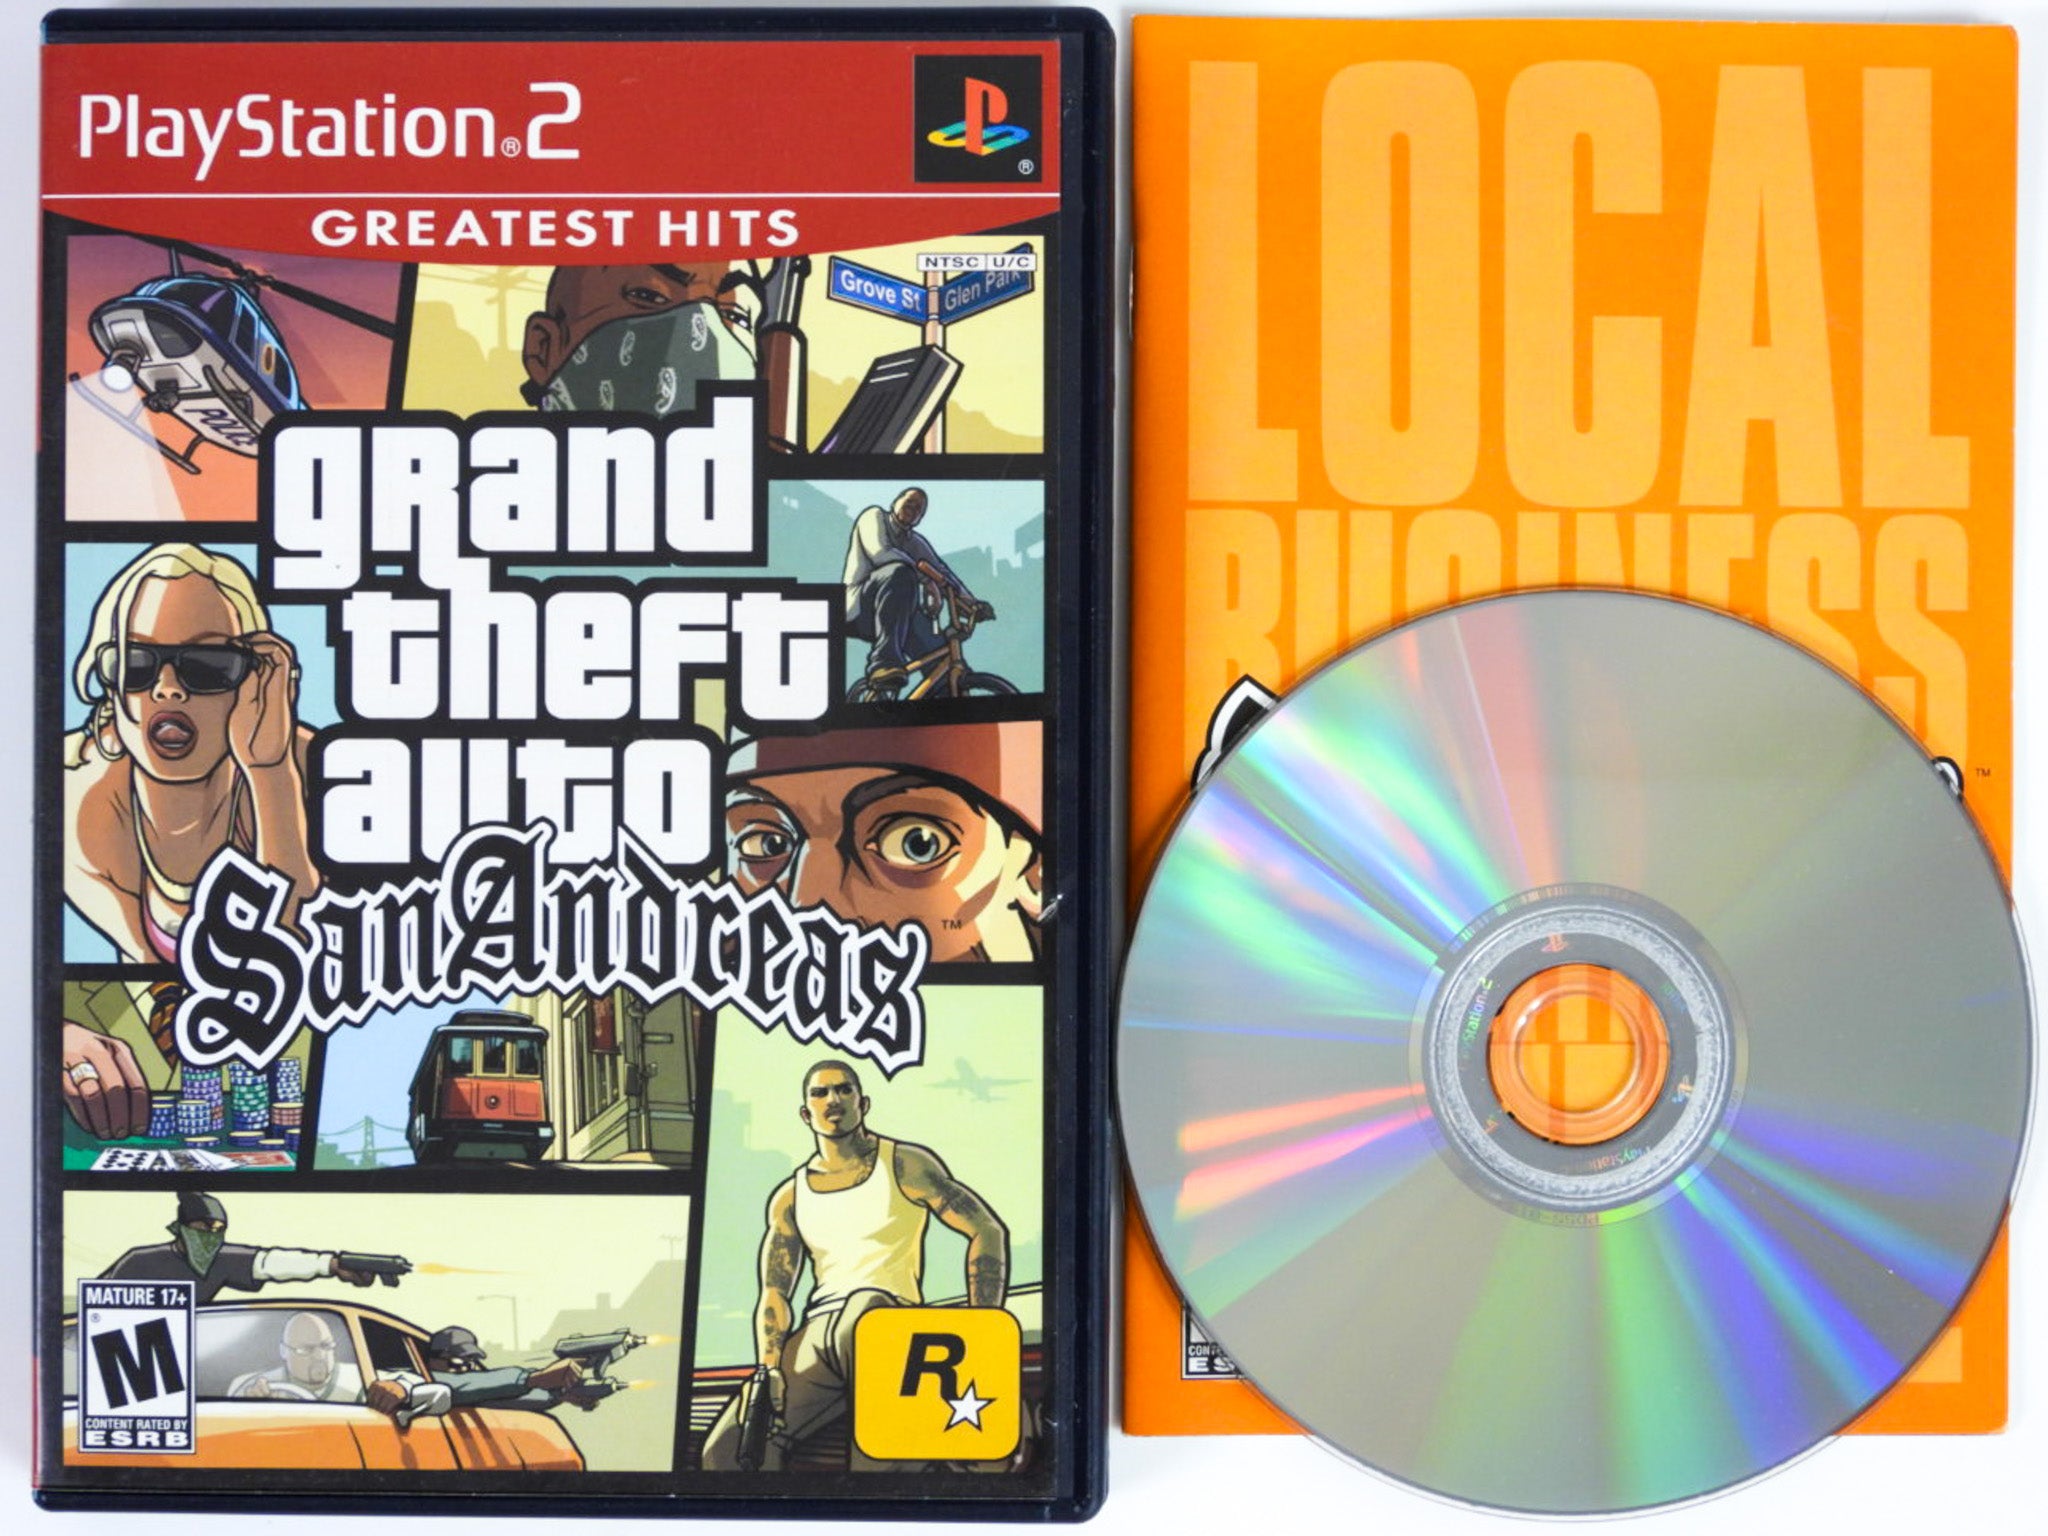 Grand Theft Auto GTA San Andreas PlayStation 2 Complete w/Map